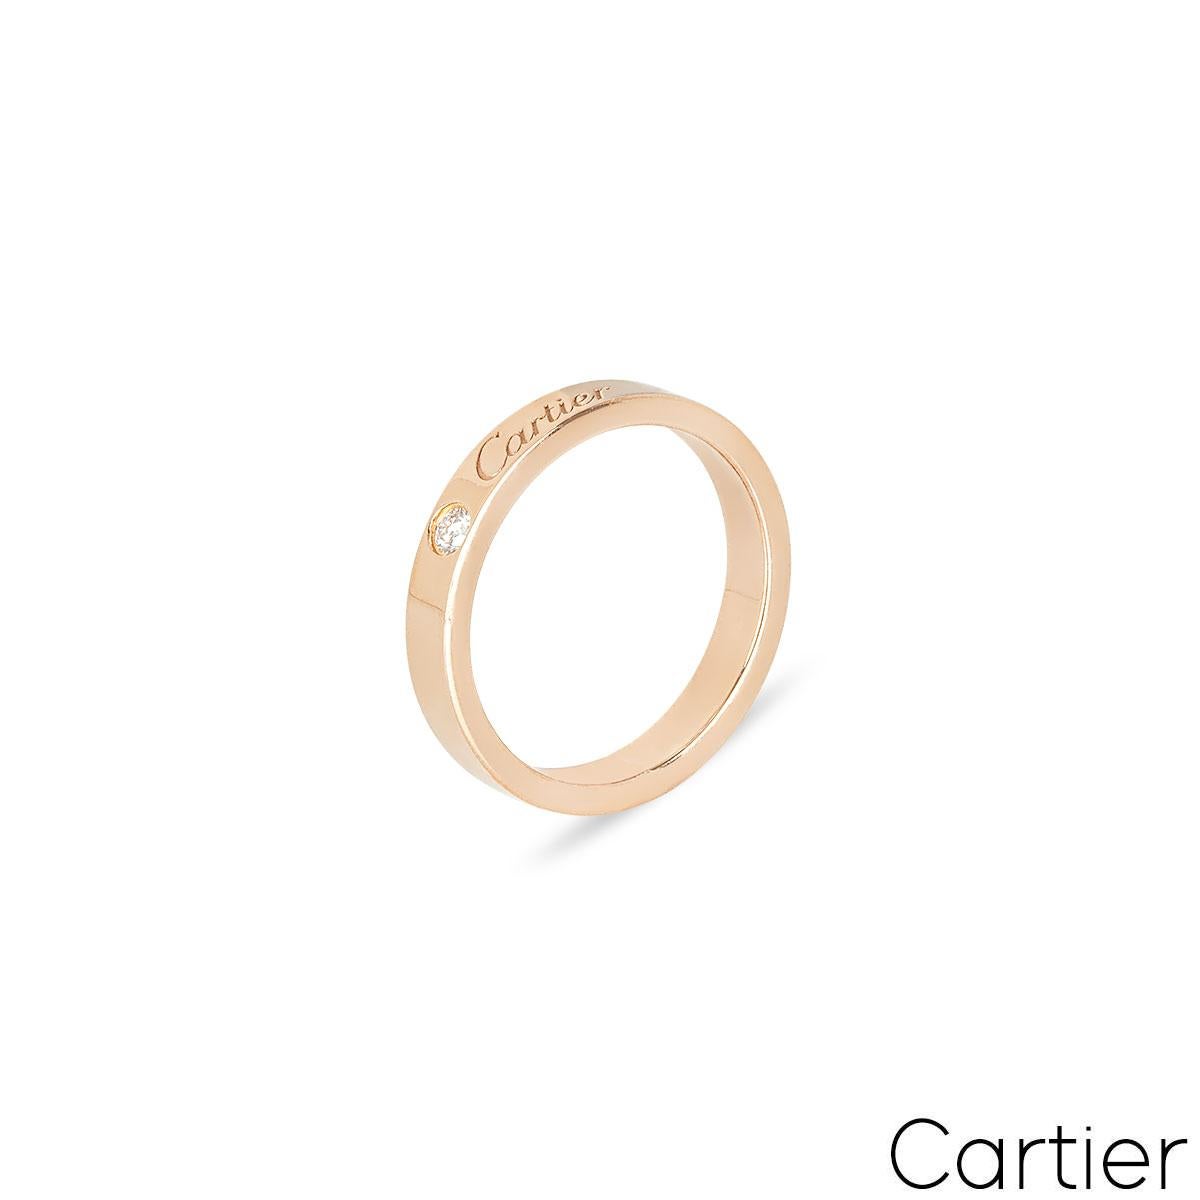 An 18k rose gold wedding band from the C de Cartier collection by Cartier. The ring features a single brilliant cut diamond 0.03ct, complemented by the Cartier signature. The wedding band is 3mm in width, a size UK K - EU 50 and has a gross weight